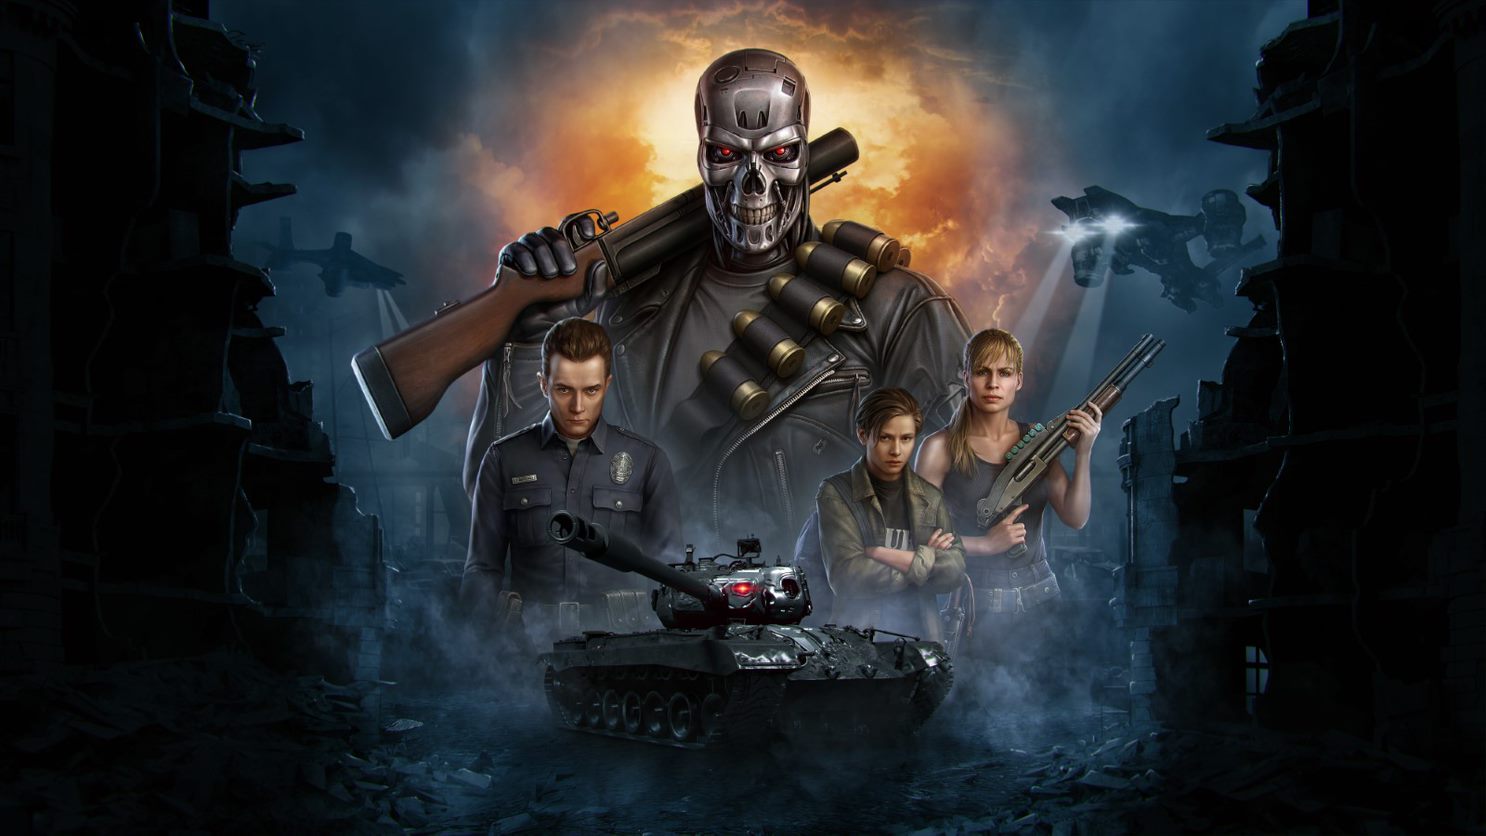 A temporary event based on Terminator 2 has started in World of Tanks / photo by Wargaming